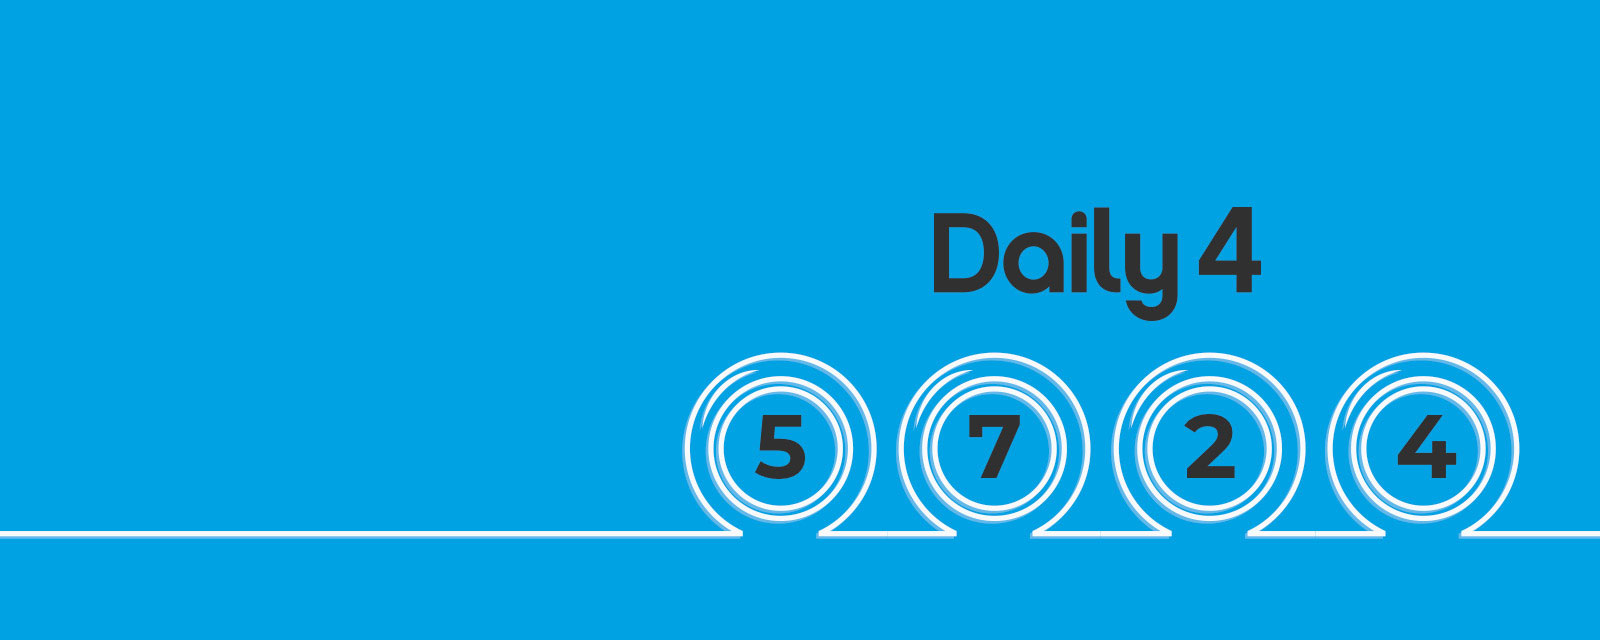 daily 4 winning numbers florida